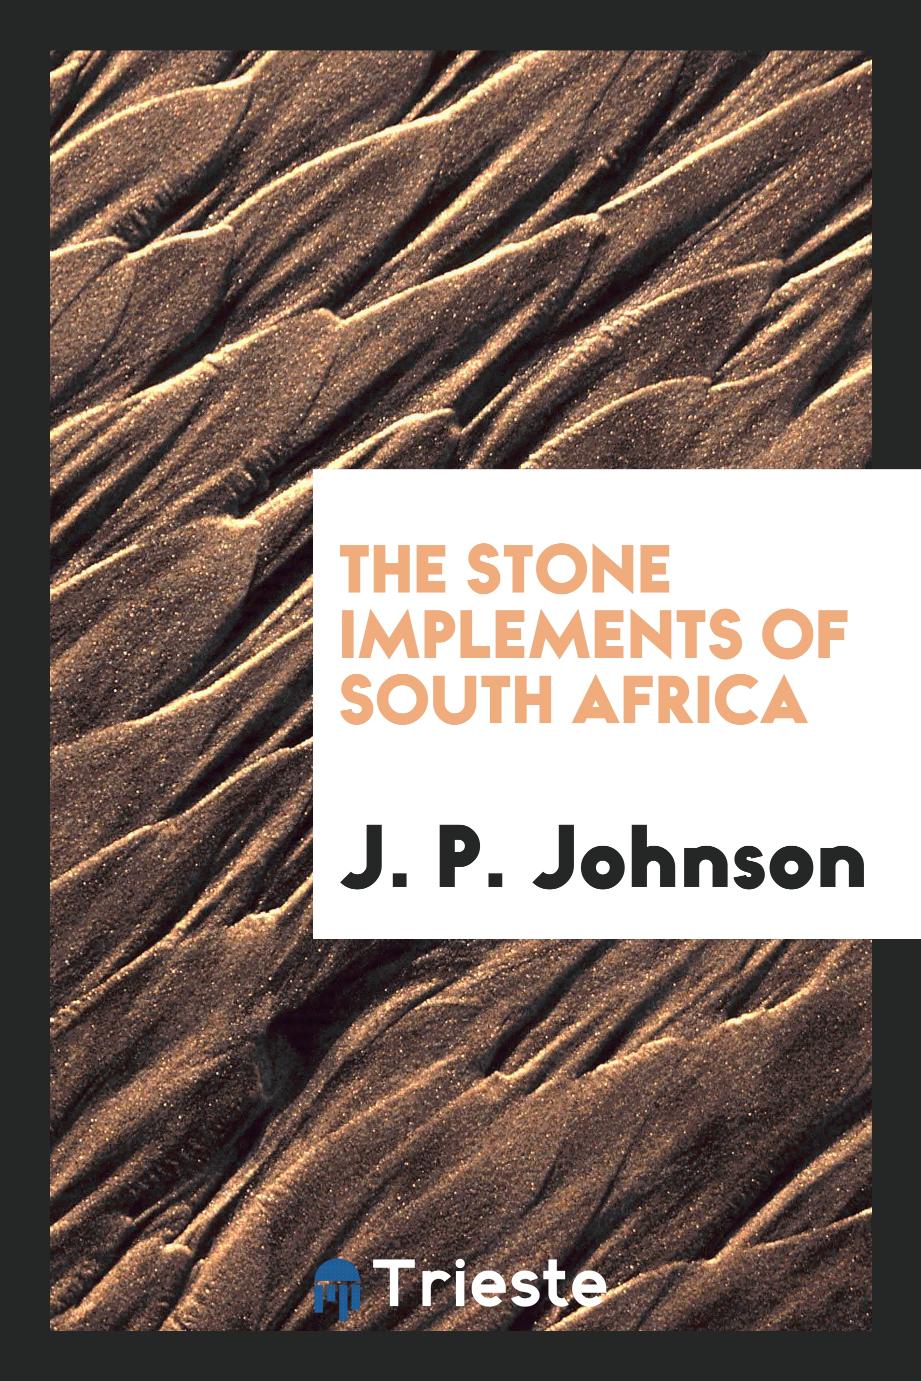 The Stone Implements of South Africa